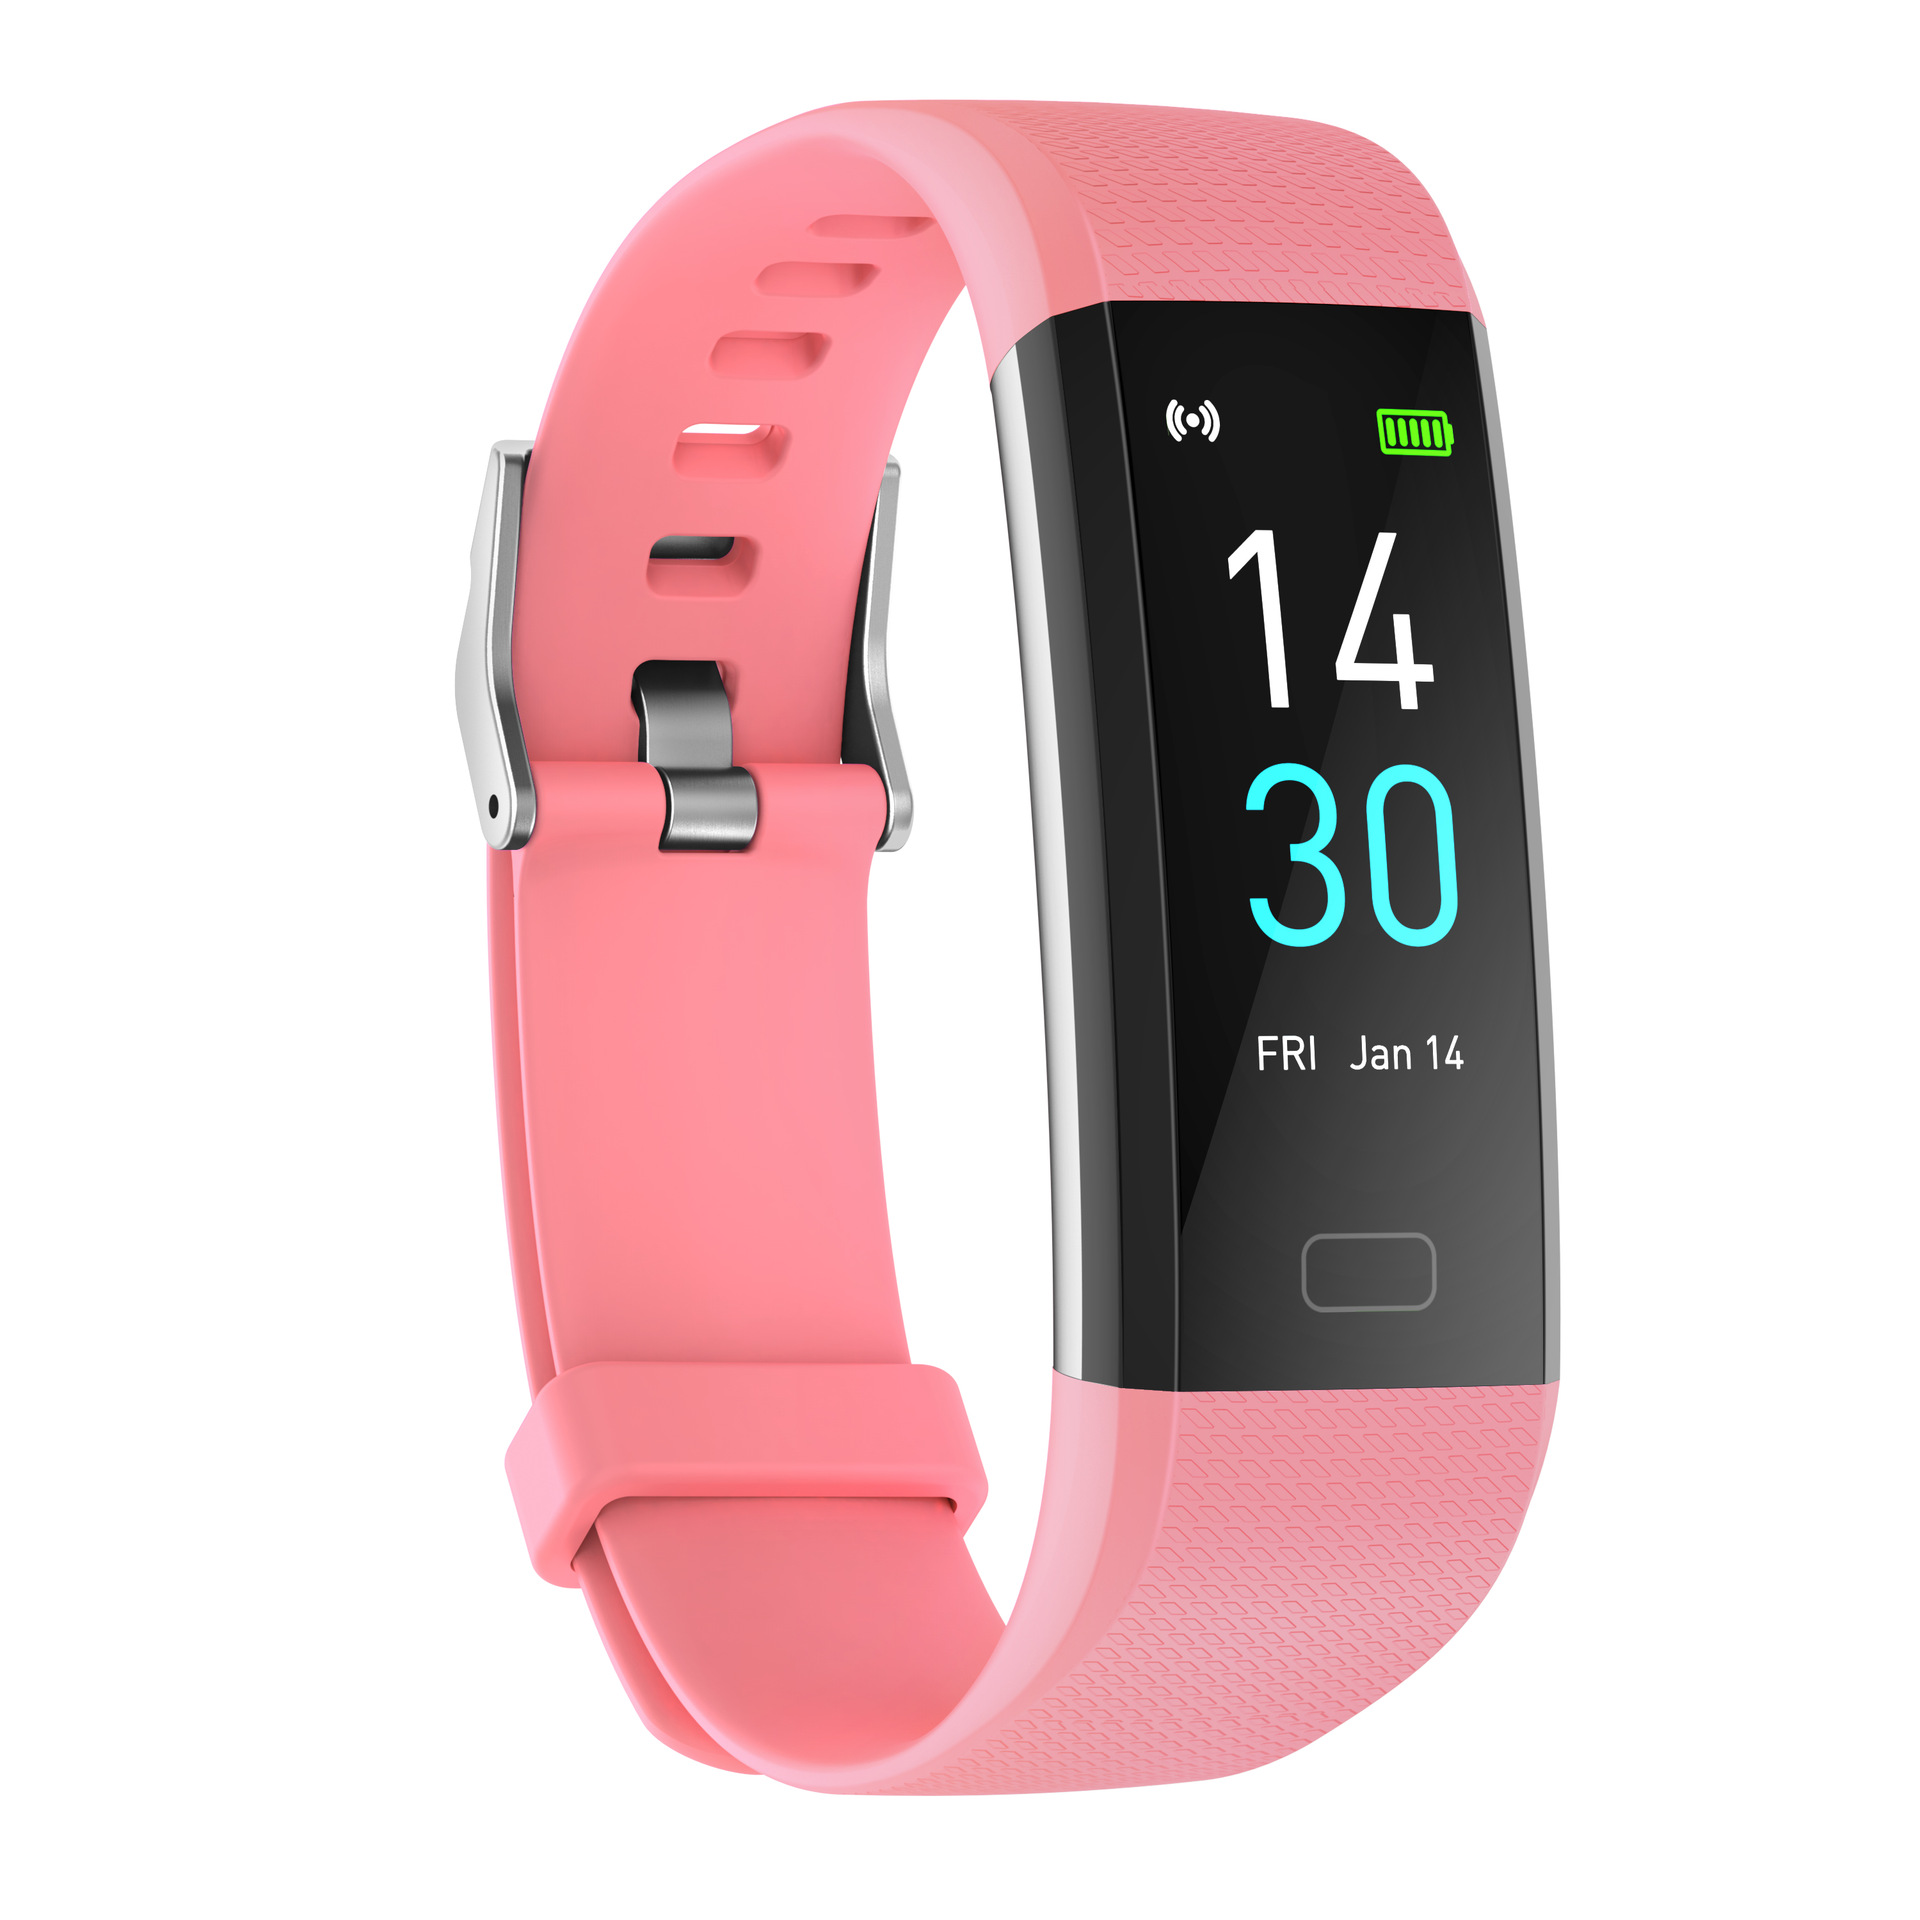 Full Touch Screen Waterproof Watch Heart Rate Wristband Blood Pressure Fitness Calling Sport Smart Watches